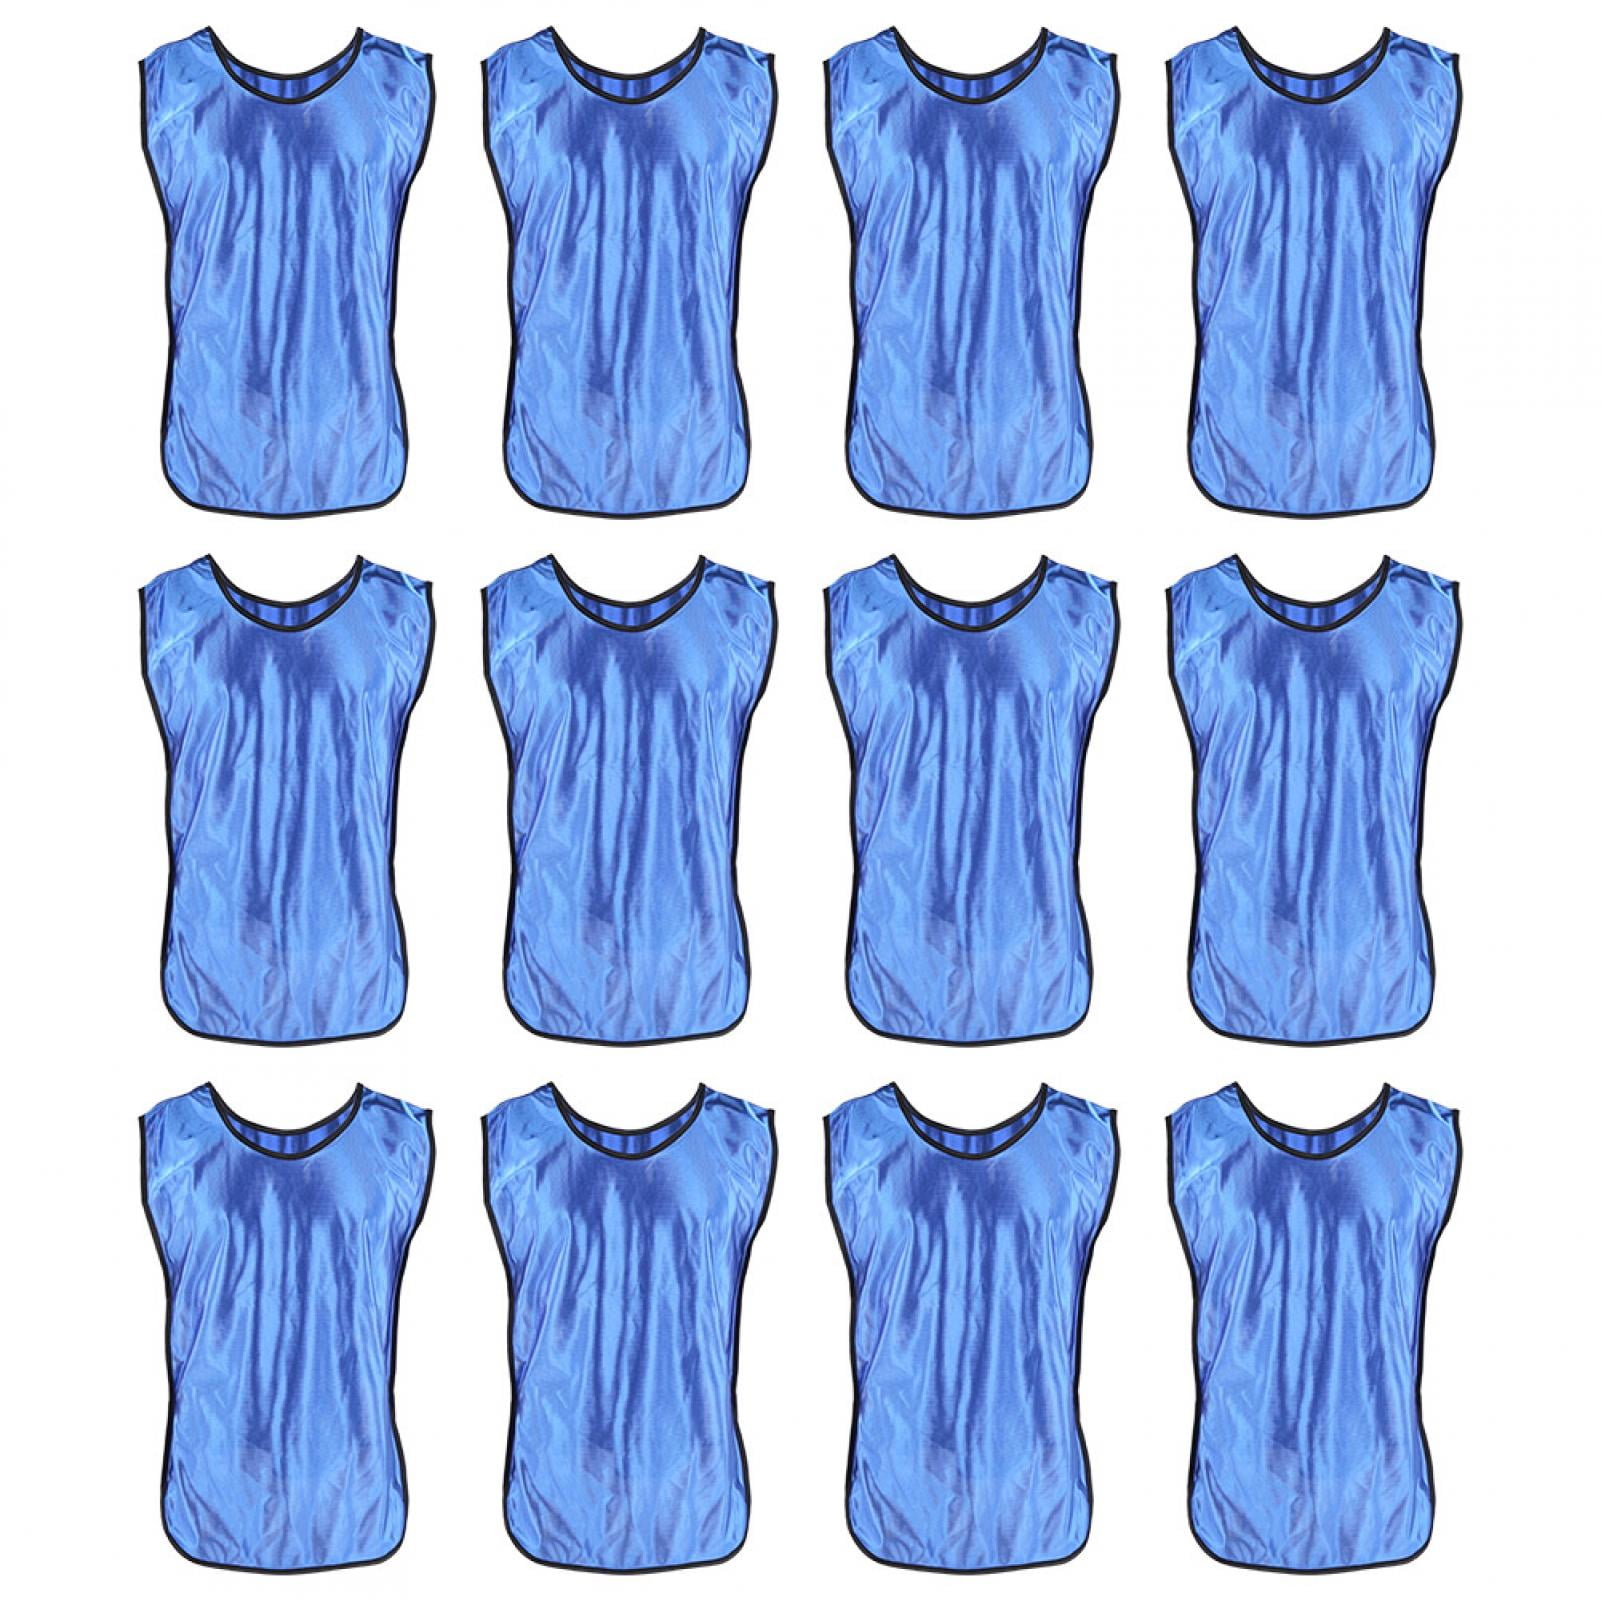 Peyan 12PCS Adult Waistcoat Scrimmage Vests Perfect for Adults Basketball Football Volleyball Jerseys Practice Vests Soccer Sports Training Bibs Scrimmage Vests